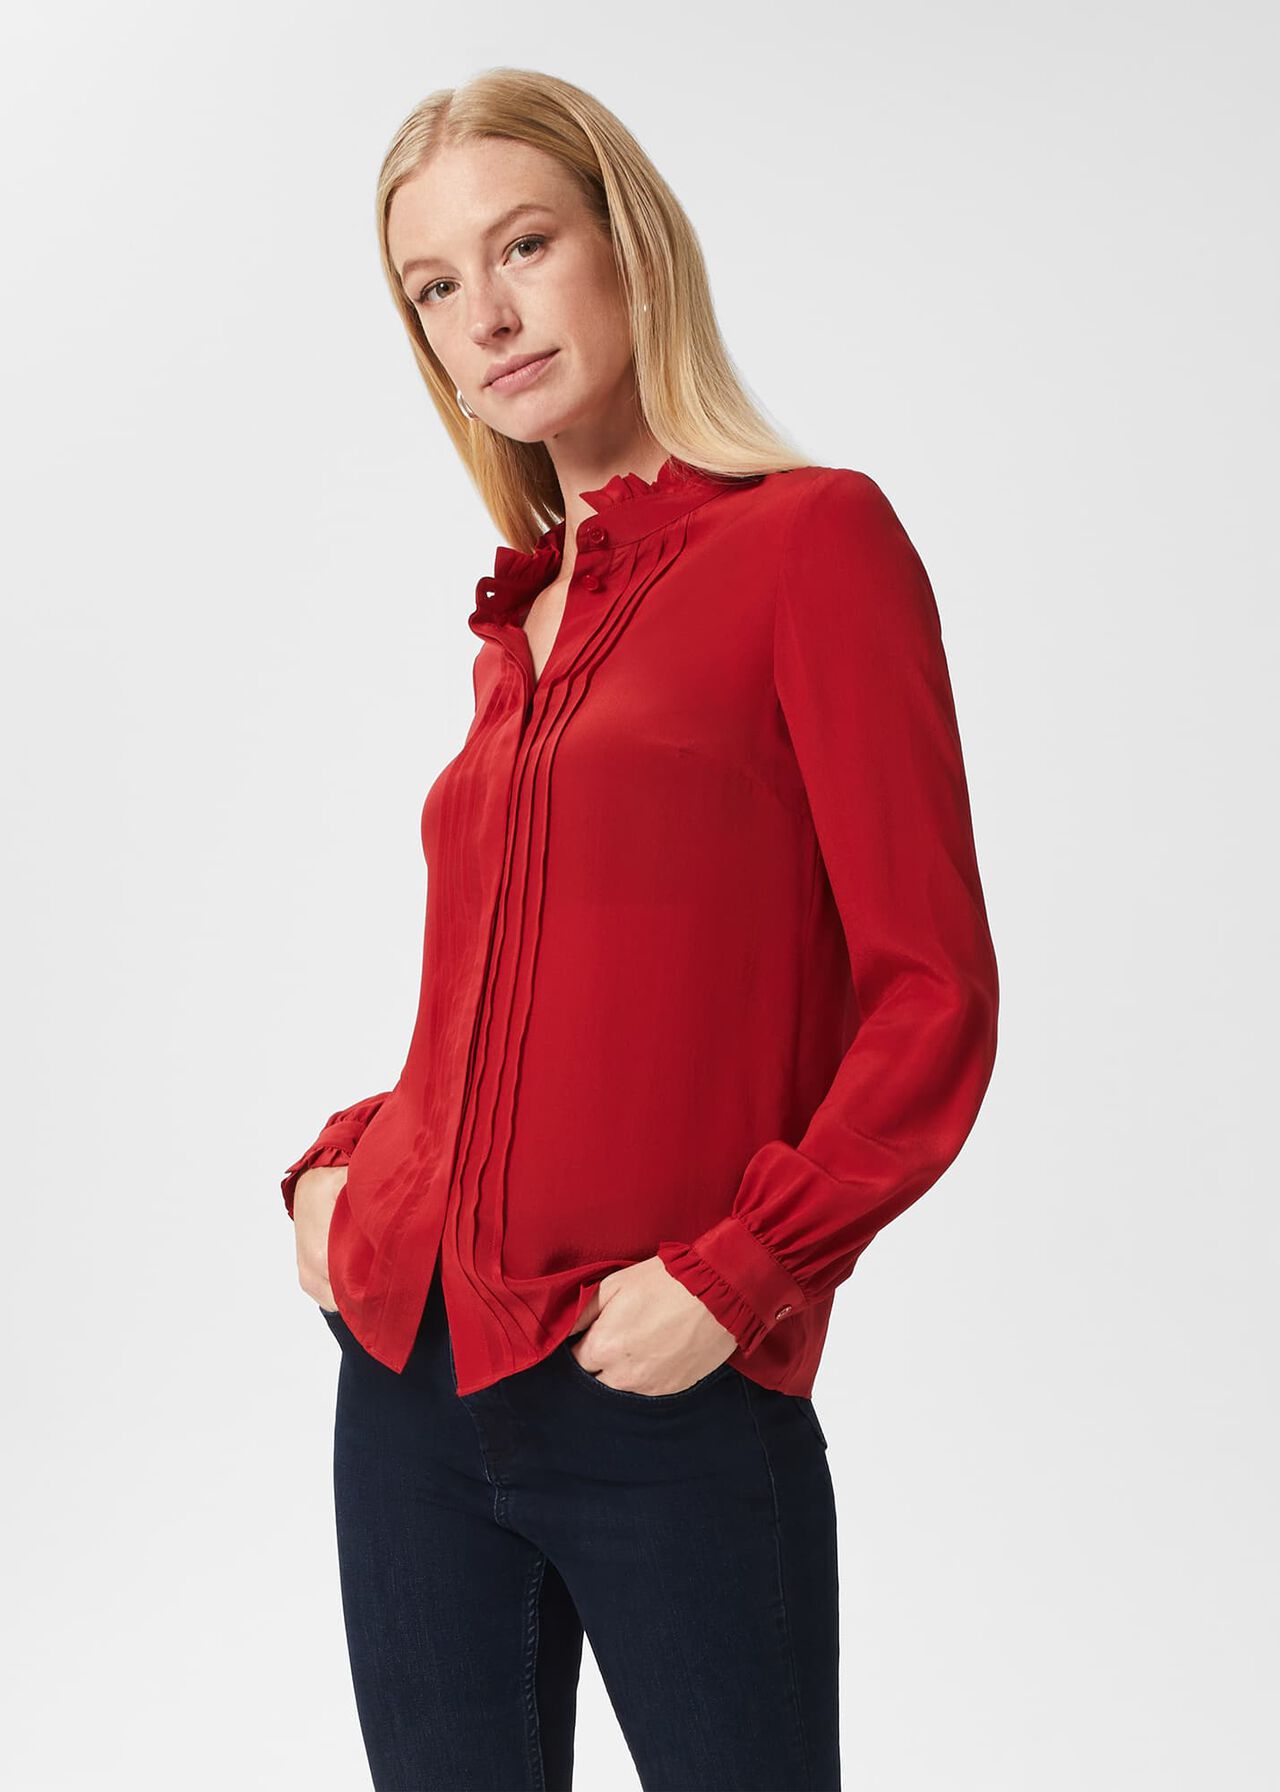 Gracie Silk Frill Blouse, Red, hi-res